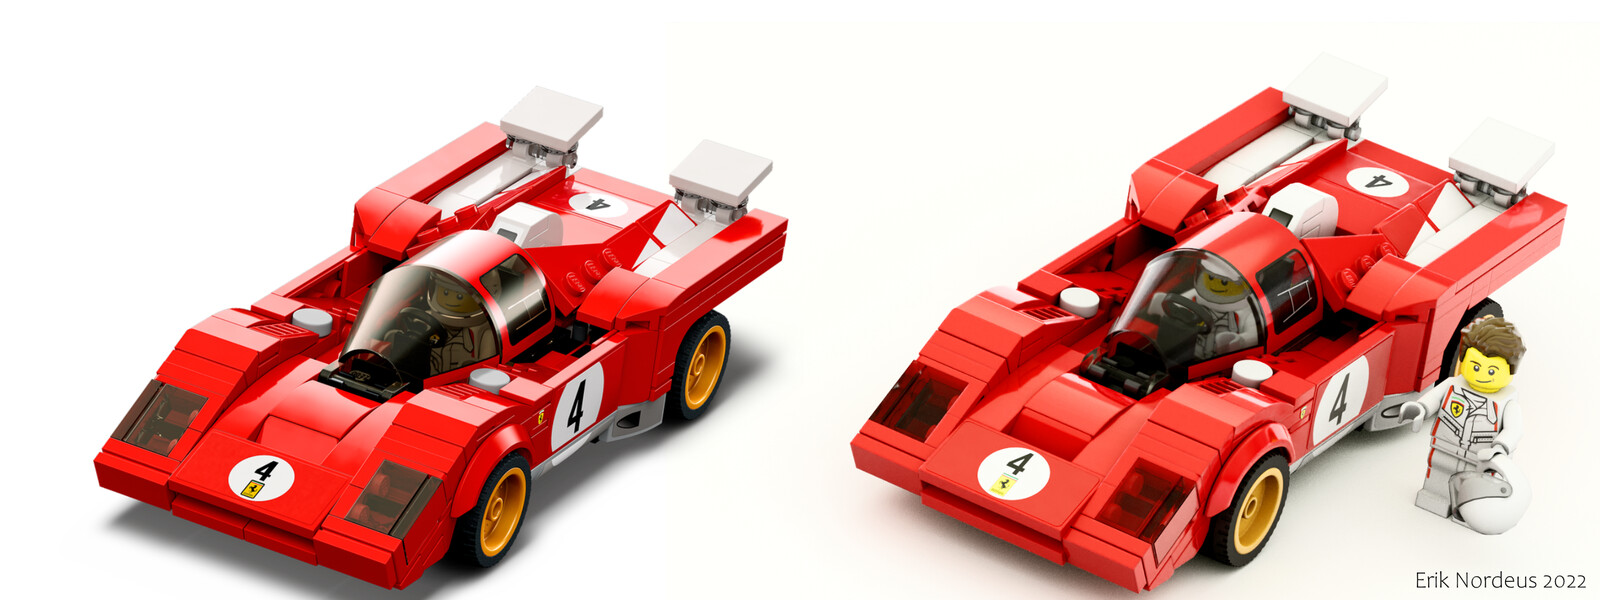 Experiment making a digital 1970 Ferrari 512 M LEGO model: the left one is from the LEGO website and the right one is by me. I think they use digital models on the website as well because the left one is too smooth to be real. 